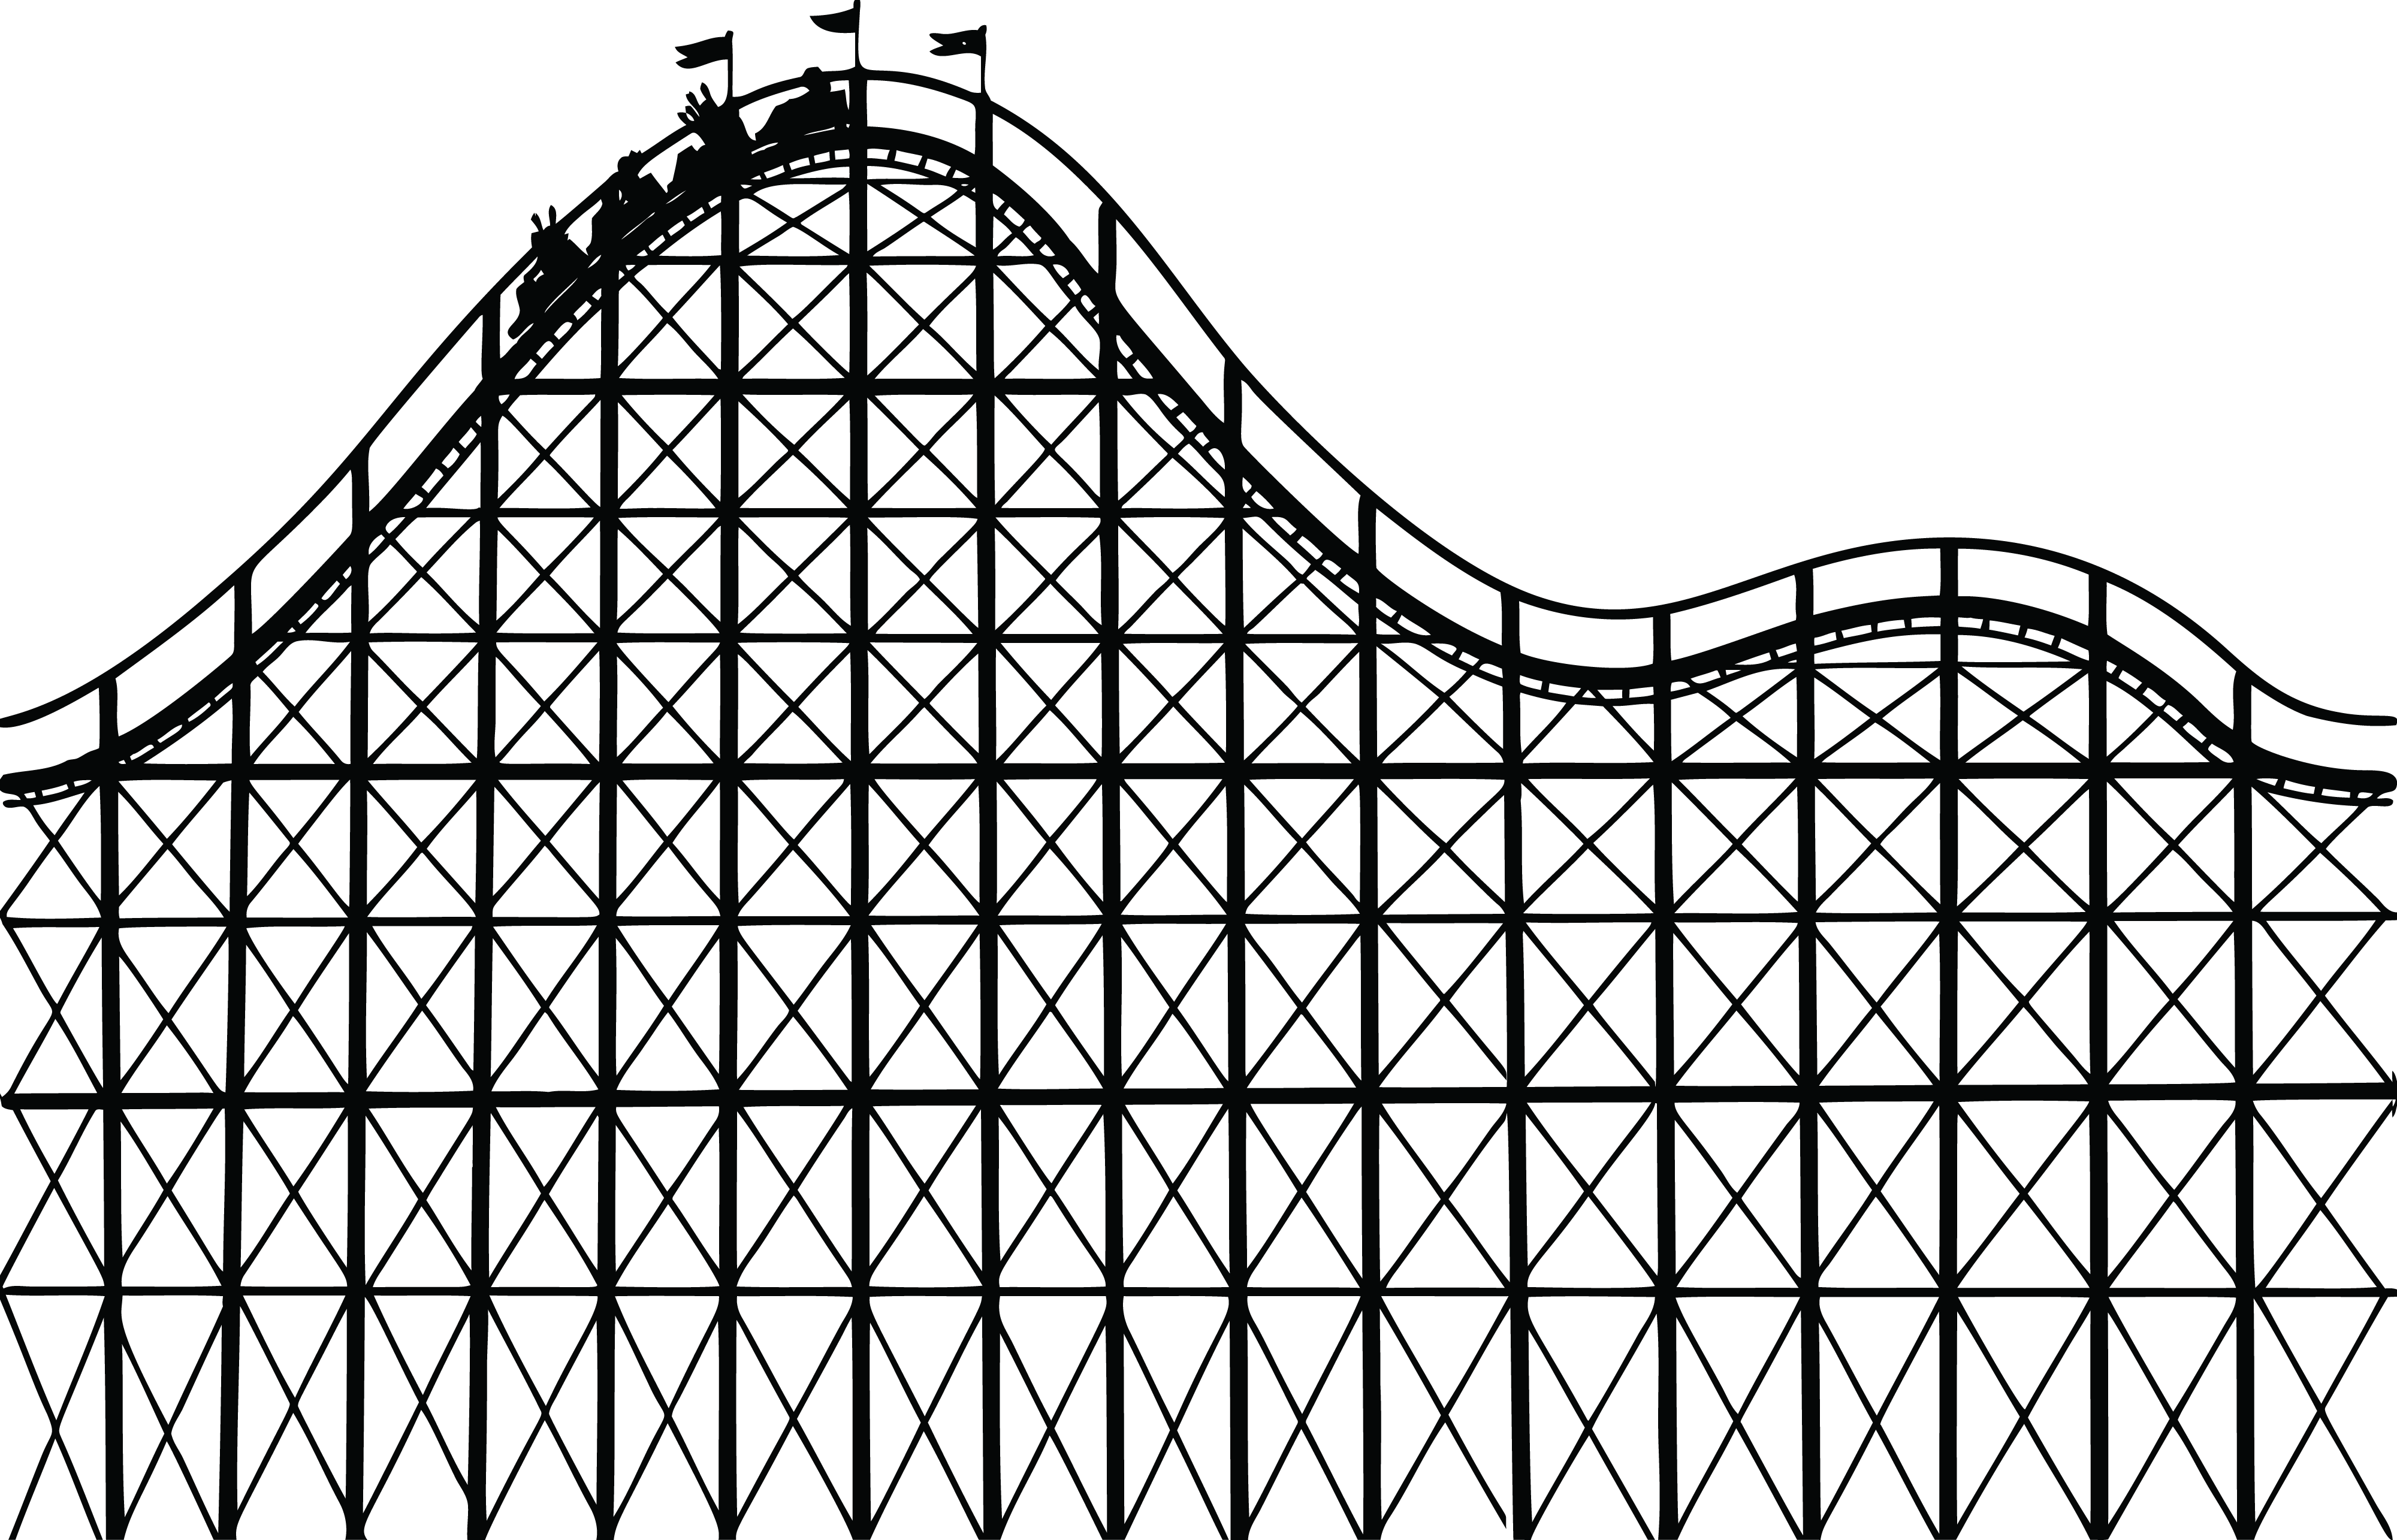 Free Clipart Of A roller coaster